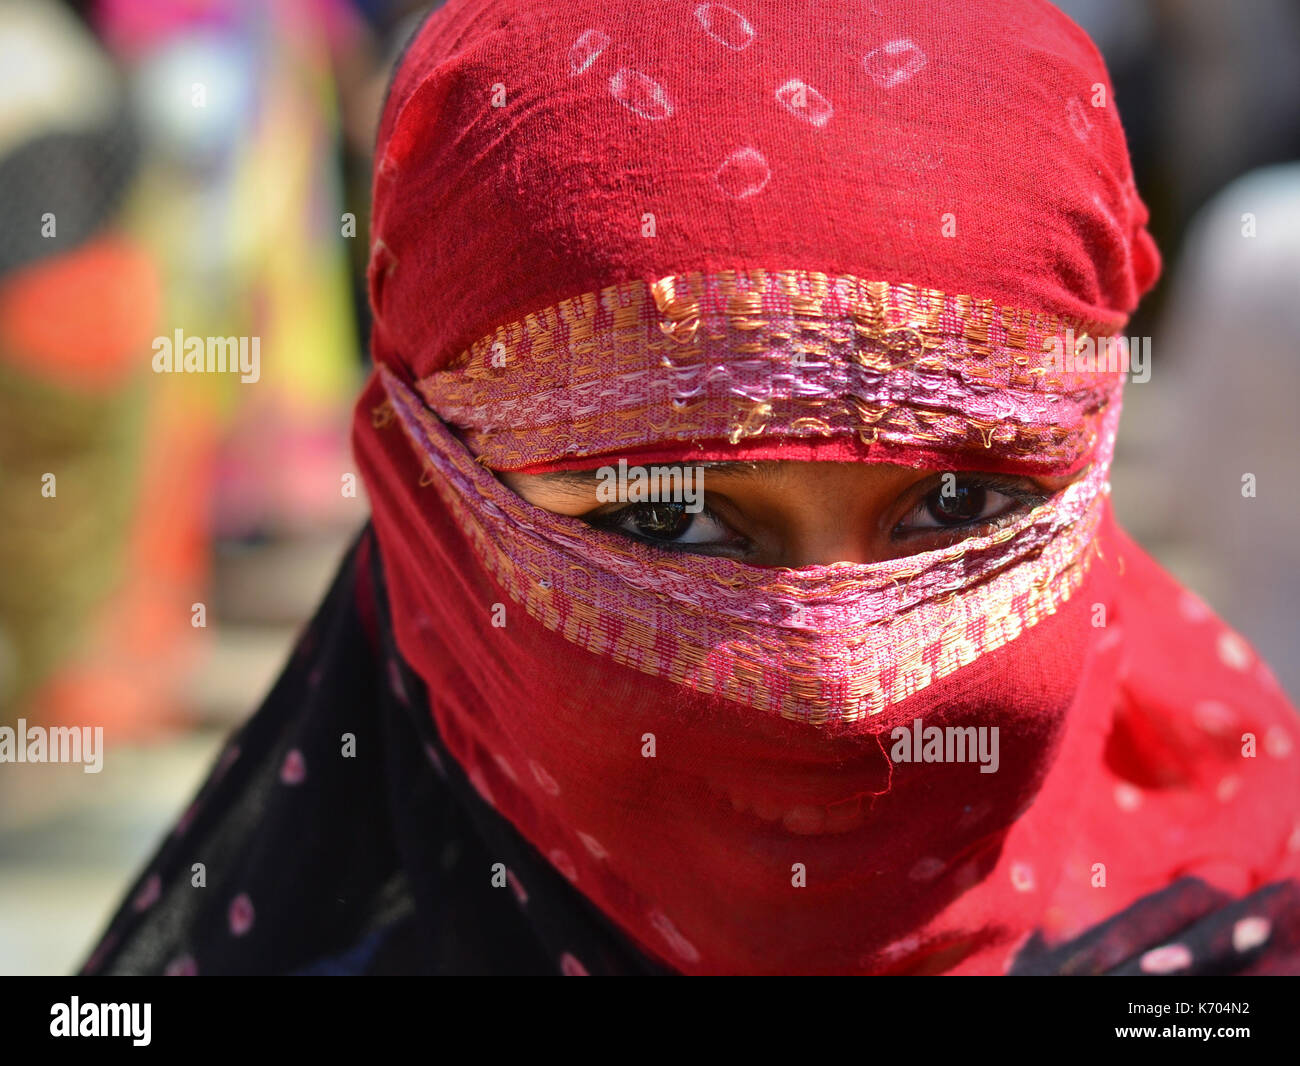 Young Indian woman with smiling eyes coverd her hair and face with a trendy half-sheer head scarf in red. Stock Photo